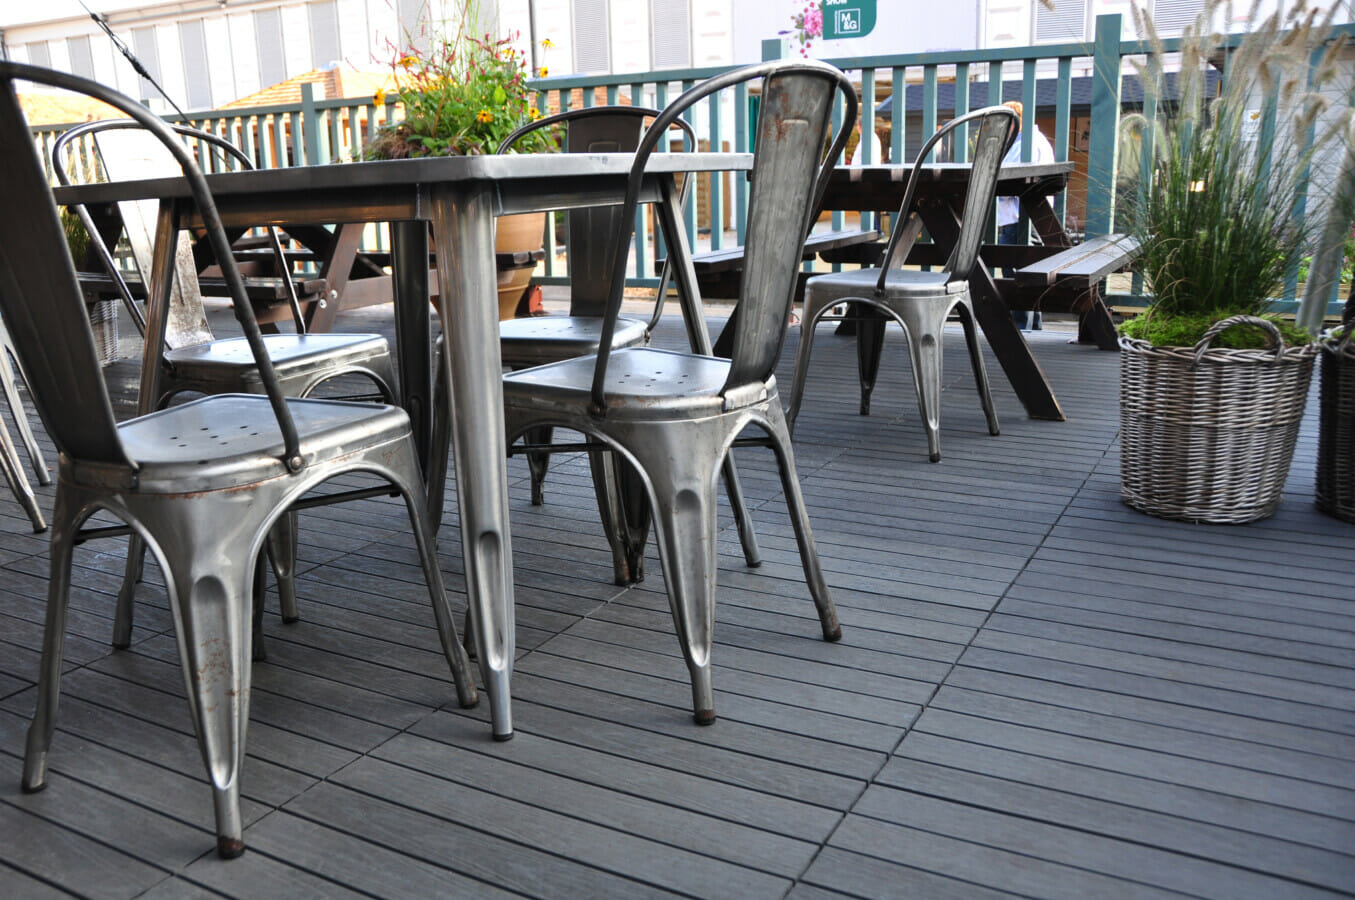 Making your outdoor dining space work all year round